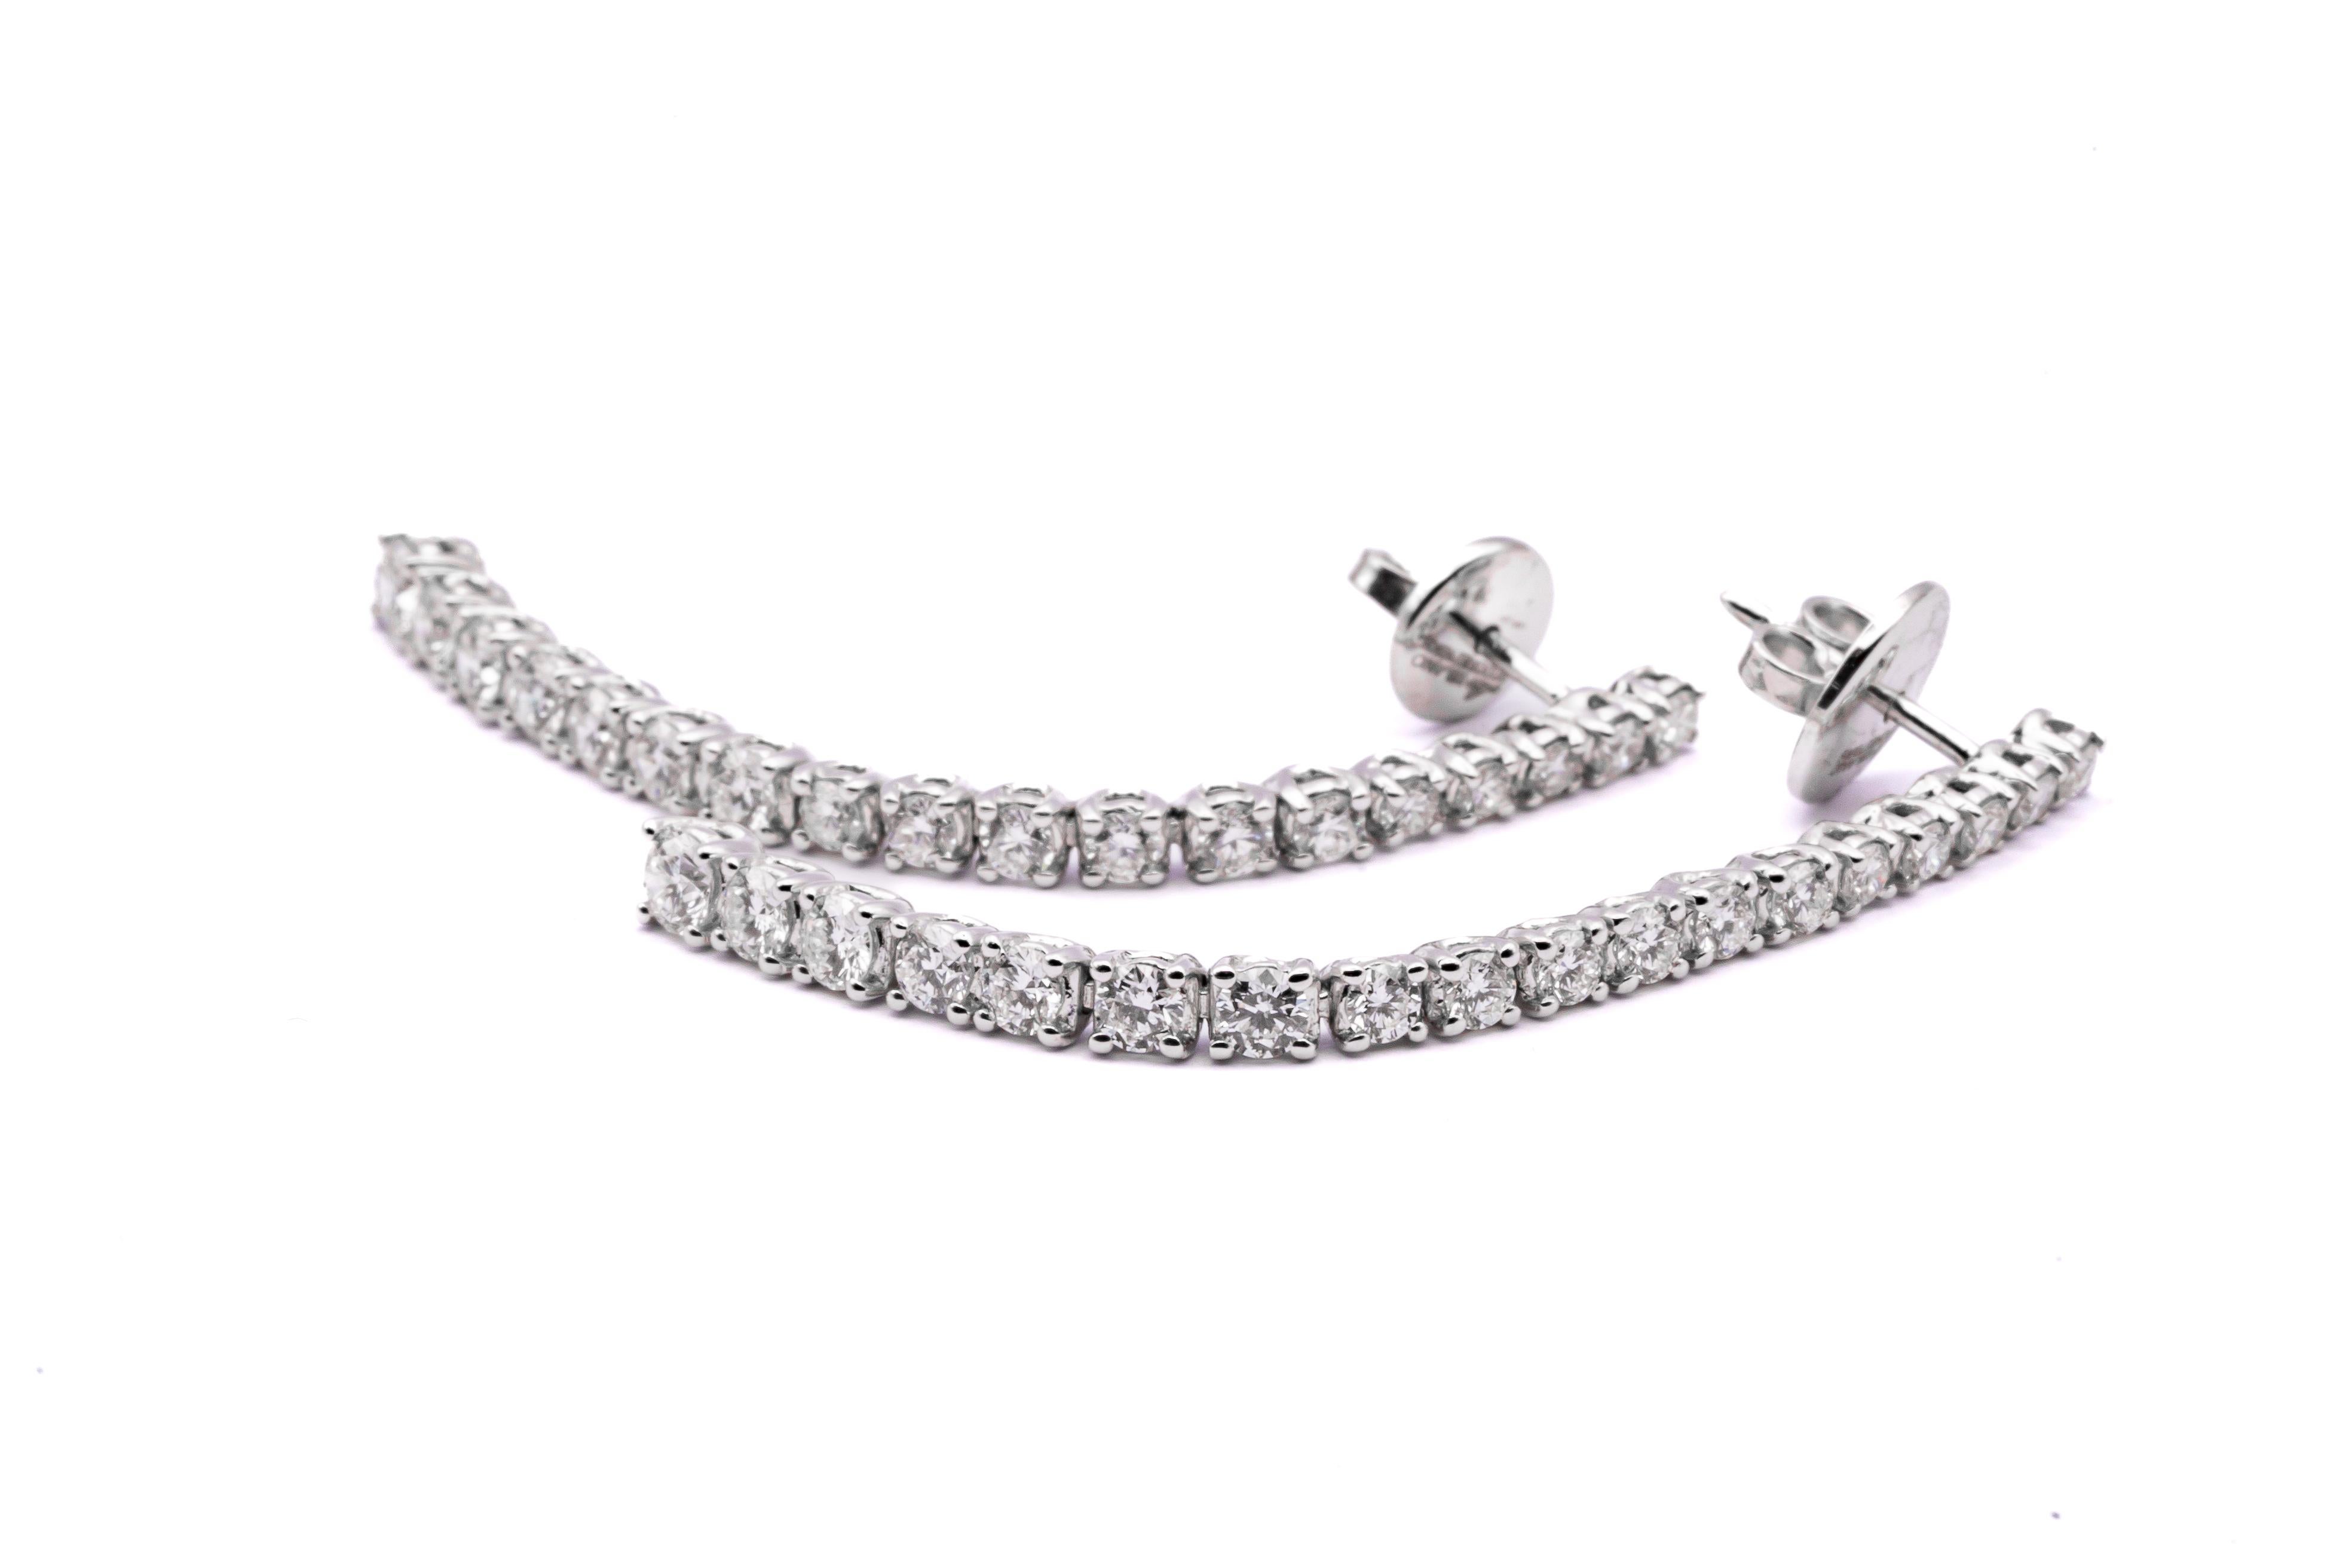 Magnificent and bright VS G color diamond tennis pendant earrings in 18 carat white gold.
Simplicity at it's best, one of our most sold item.
any item of our jewelry collection has a dedicated identification number lasered on the gold. Leo Milano